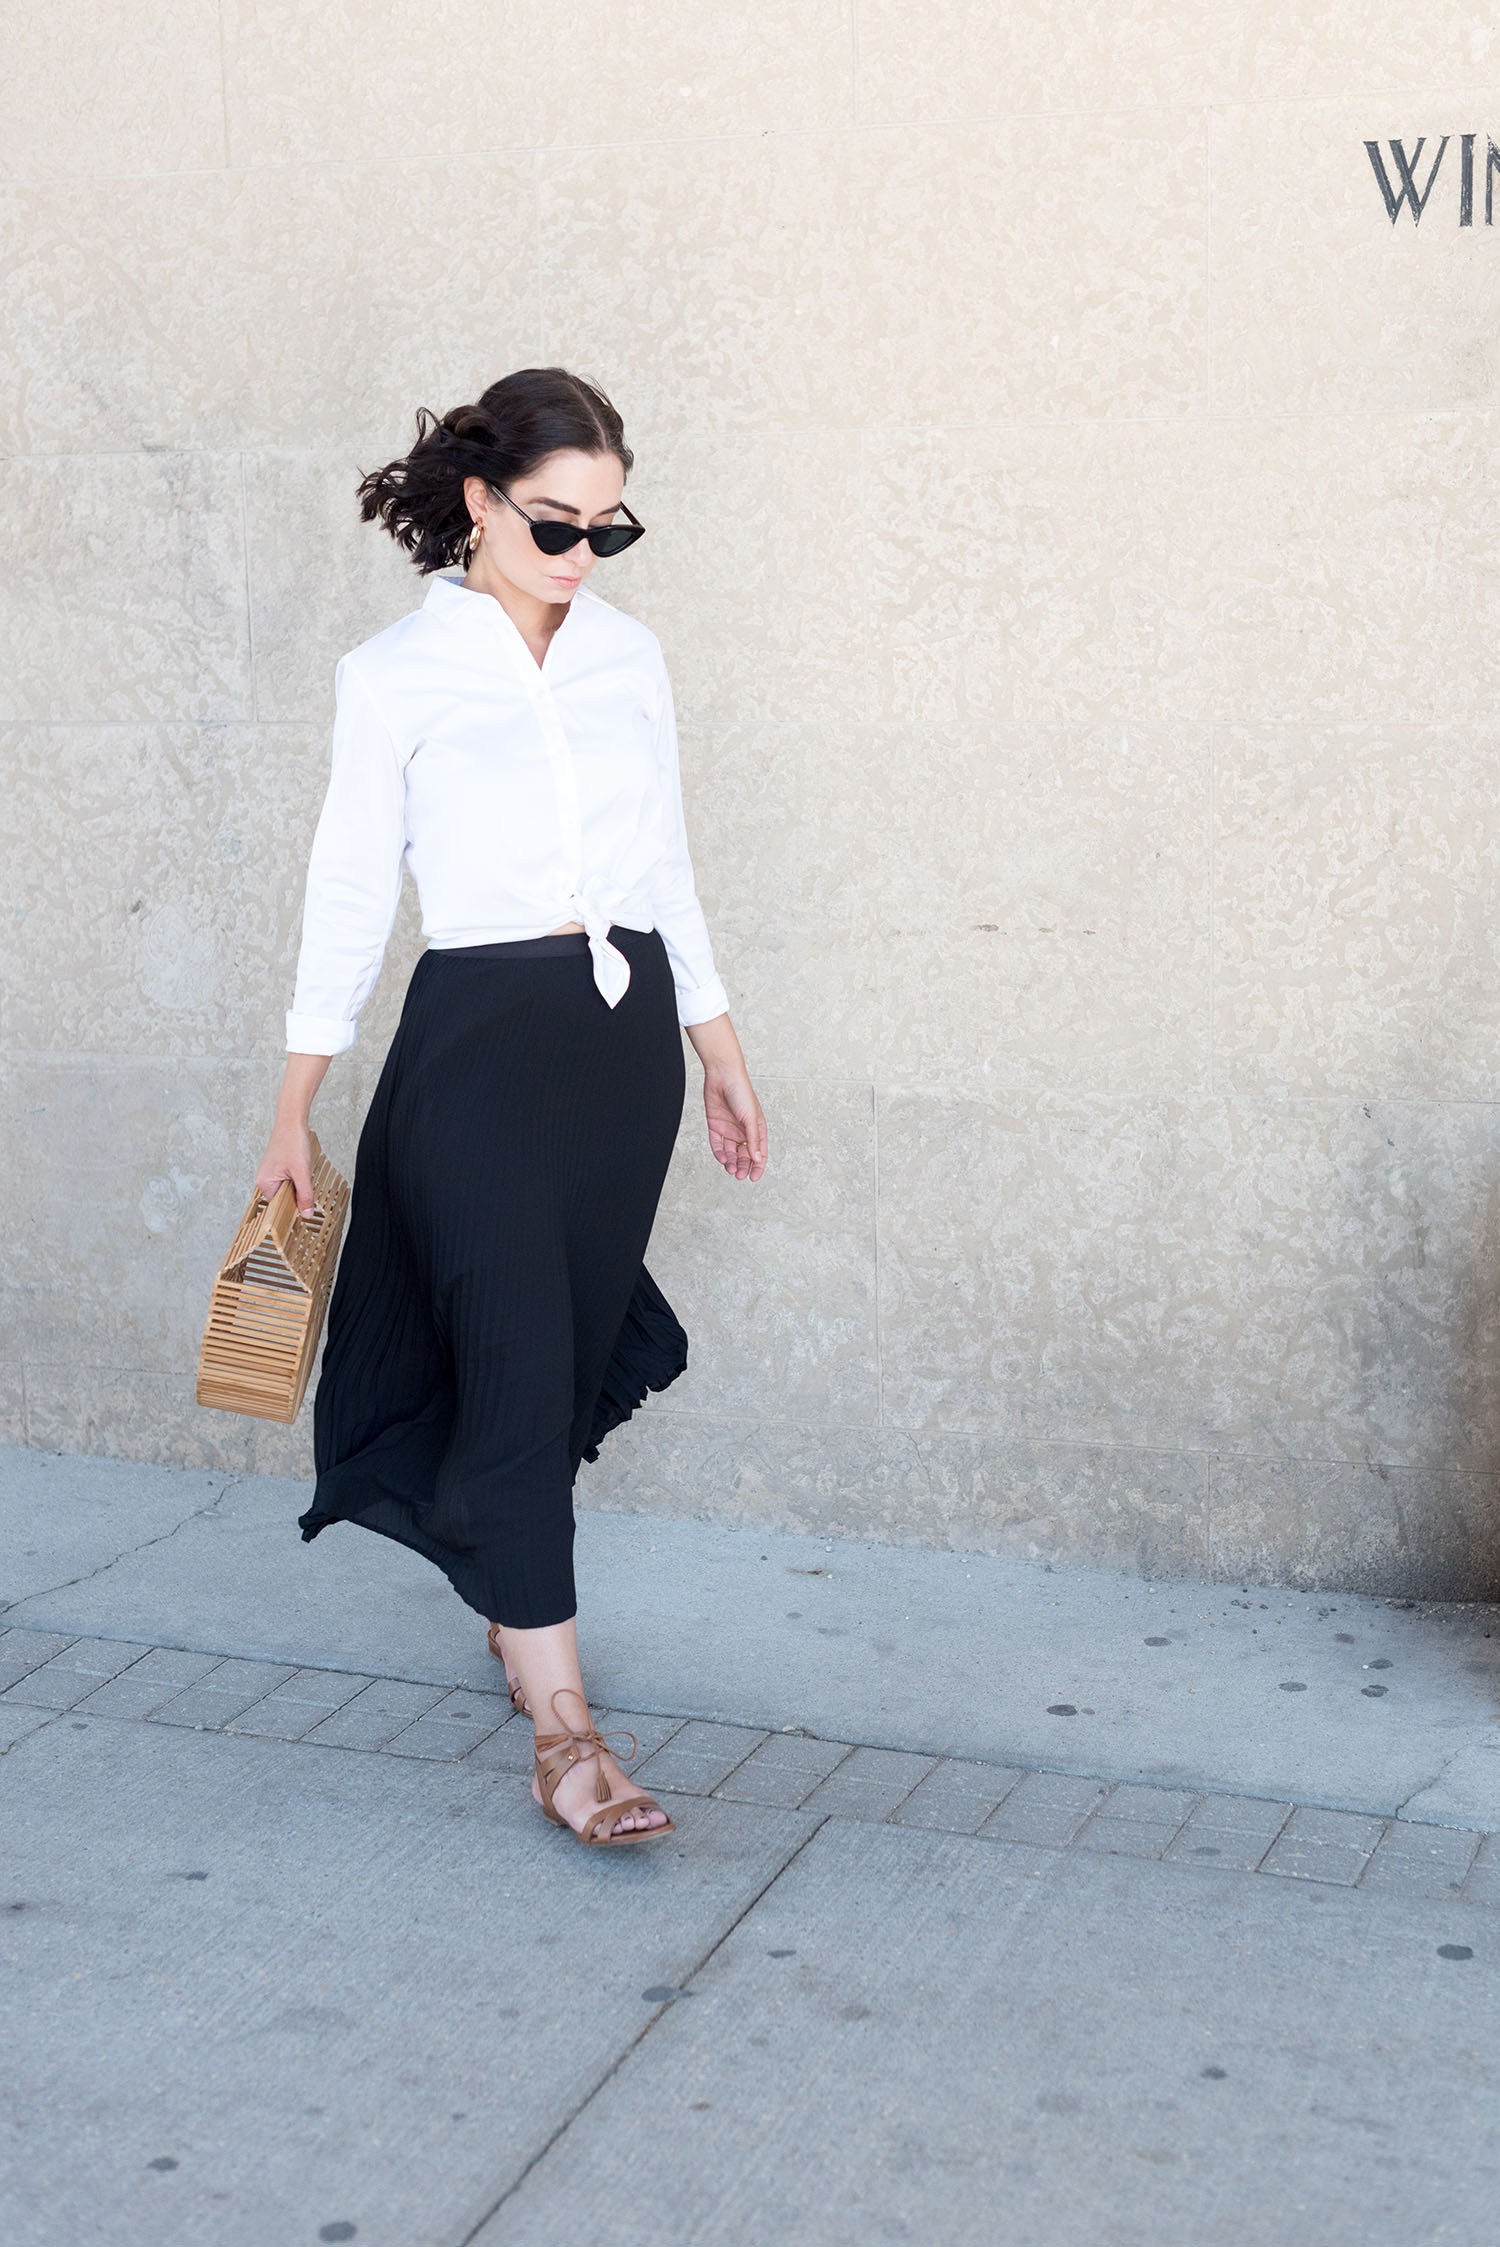 Best Canadian fashion blogger Cee Fardoe of Coco & Vera wears an Aritzia pleated skirt and carries a bamboo cage bag